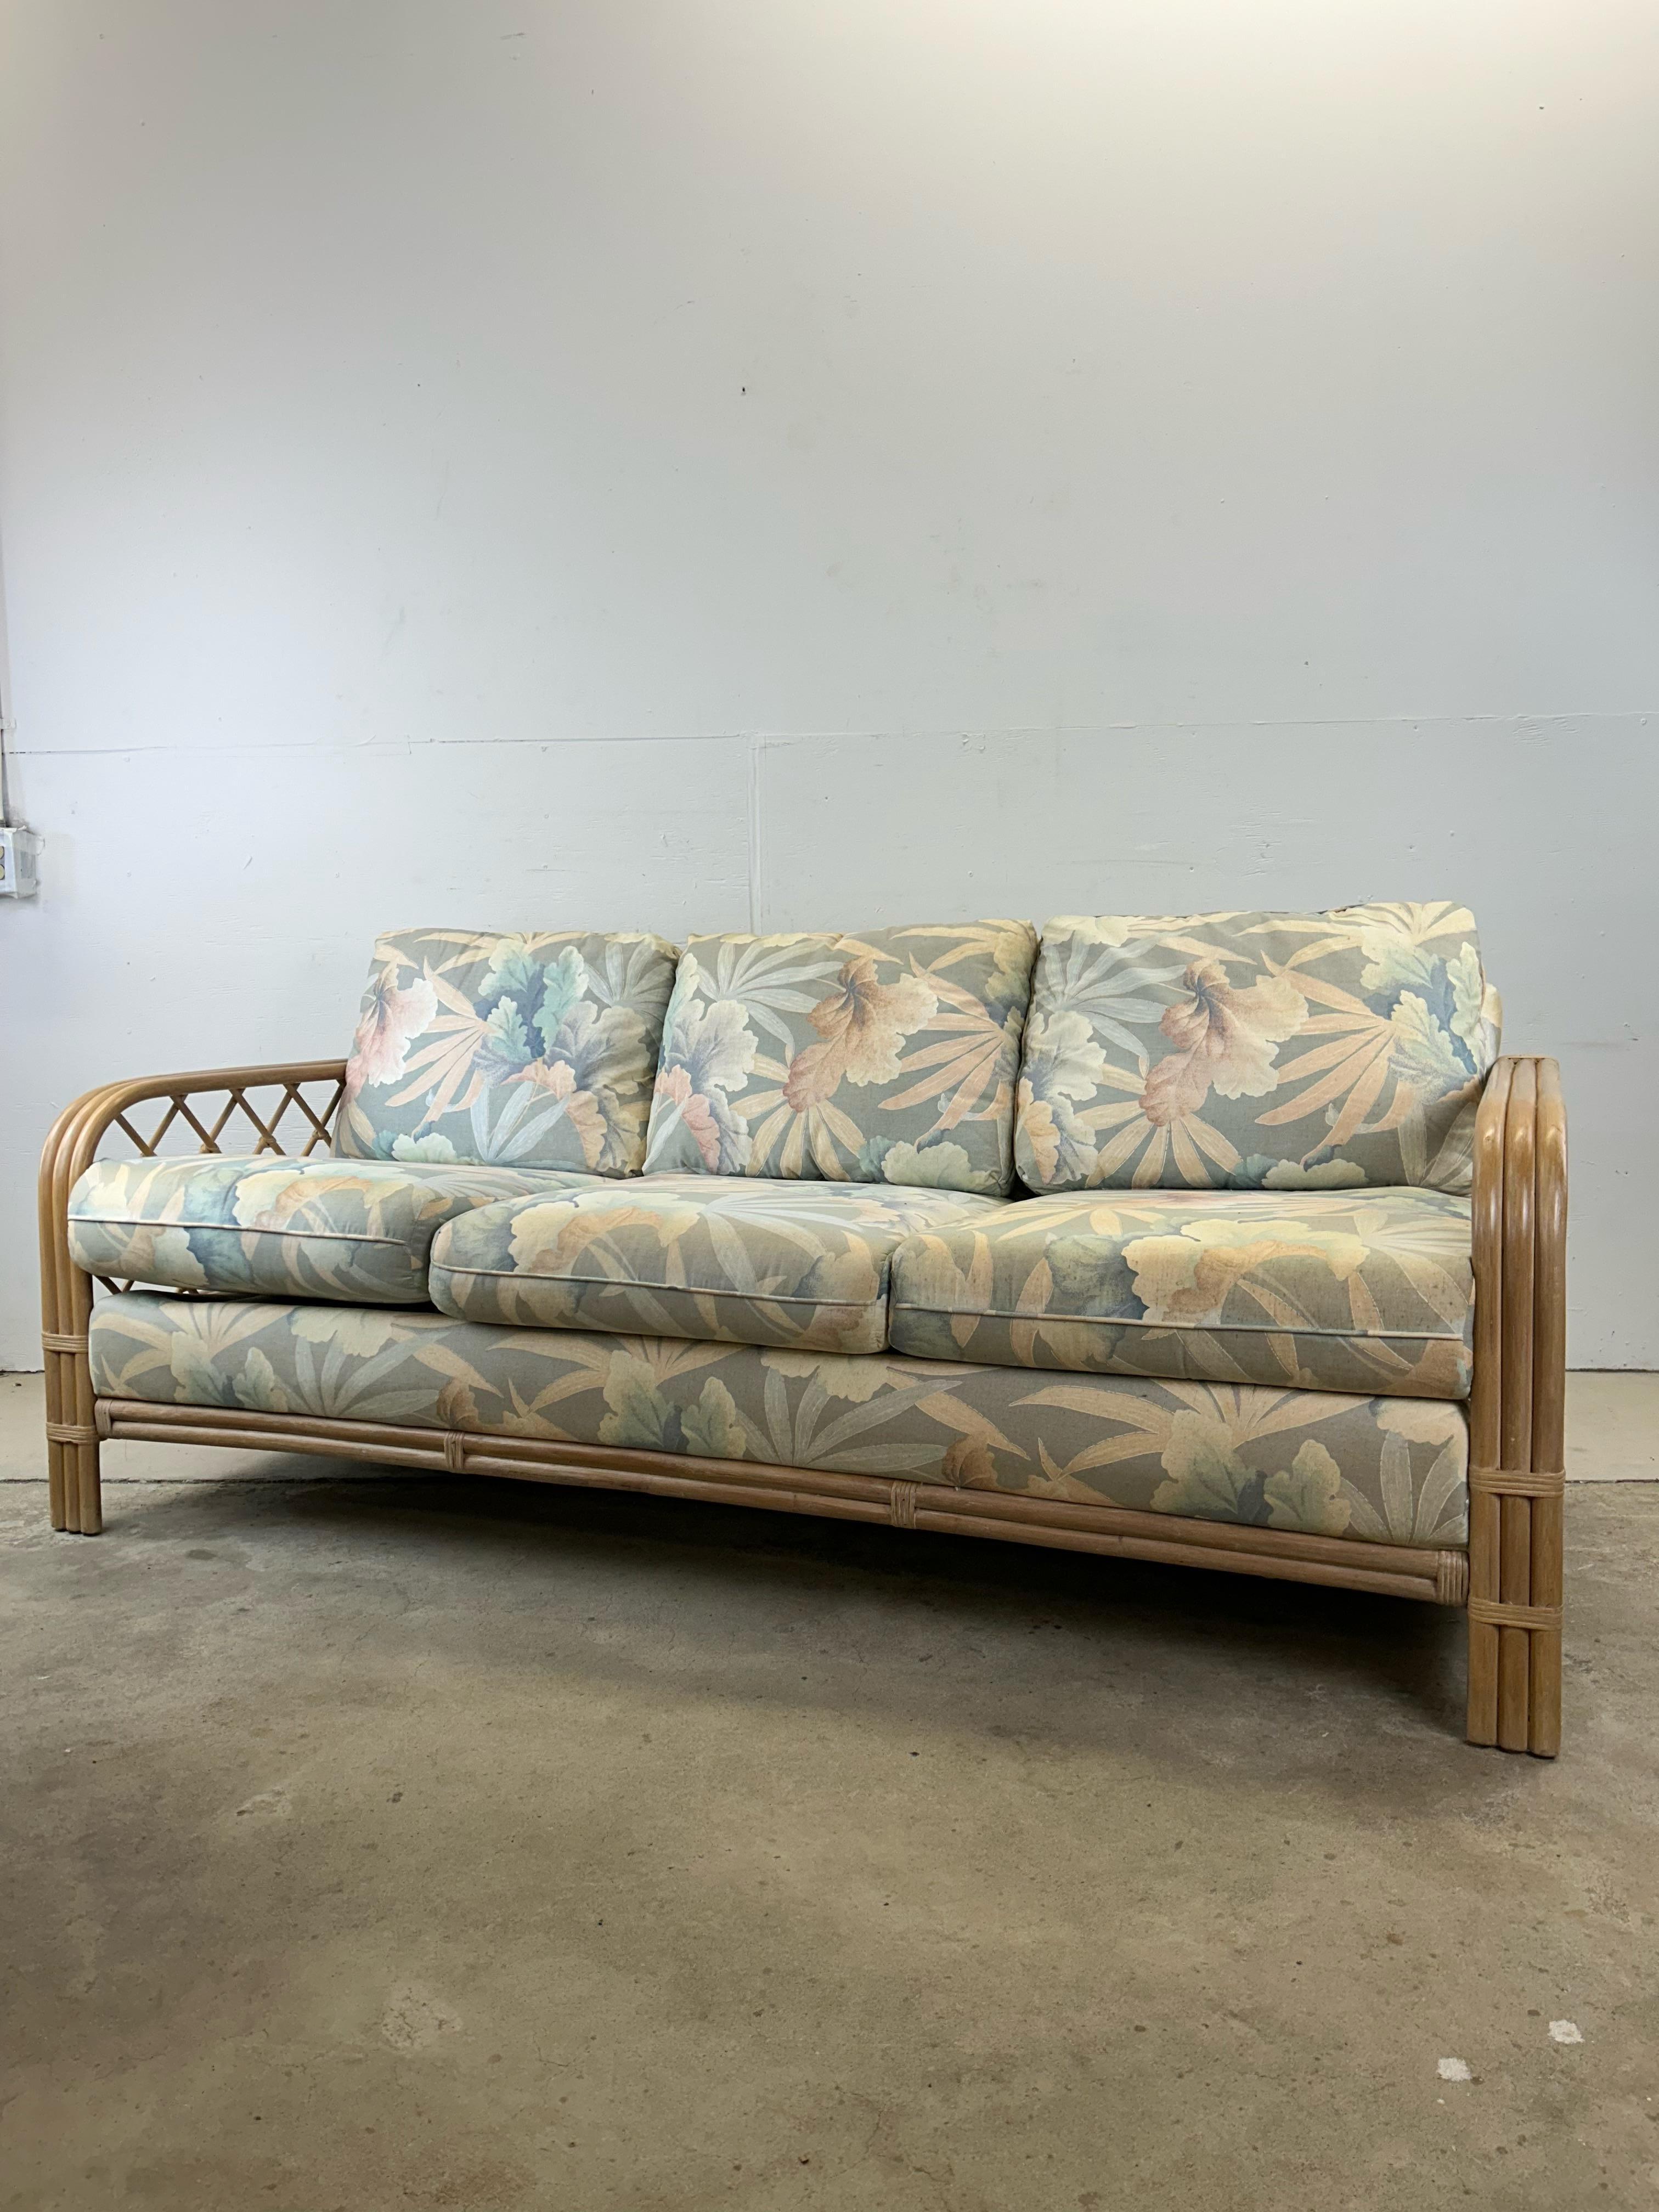 Vintage Boho Chic Rattan 3 Seater Sofa with Floral Upholstery For Sale 14